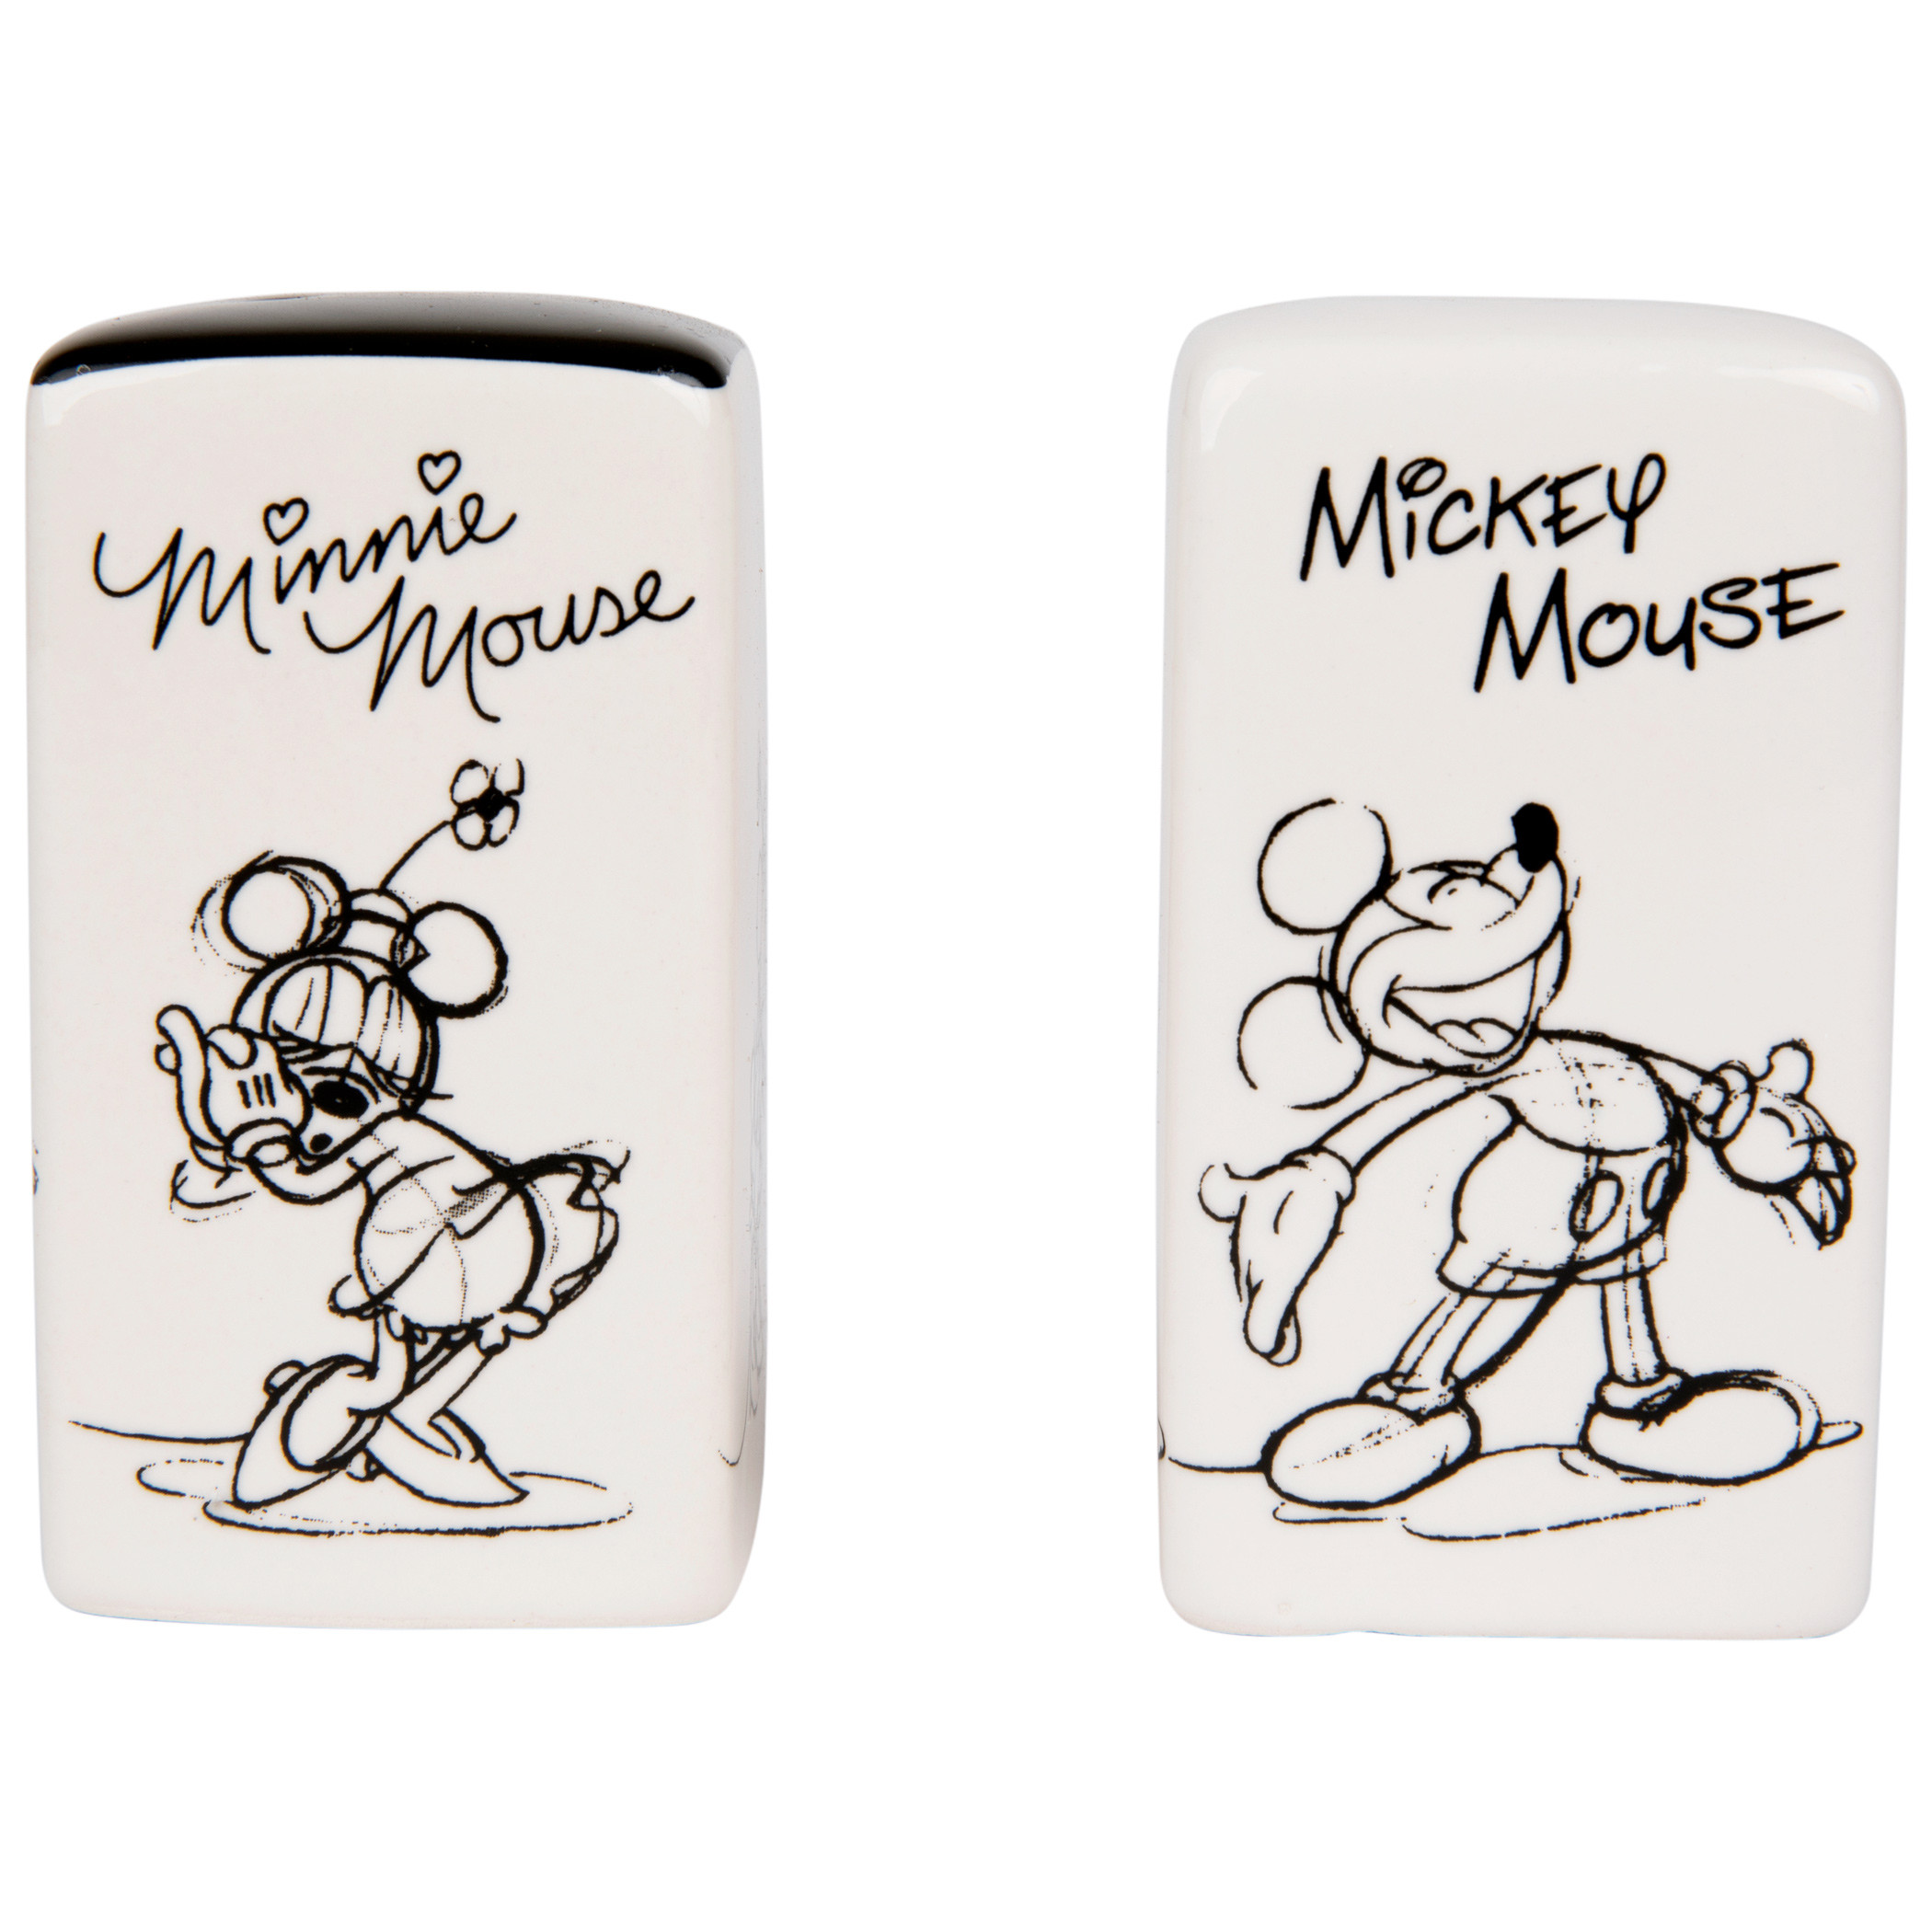 Disney Mickey and Minnie Mouse Rectangular Salt & Pepper Shakers